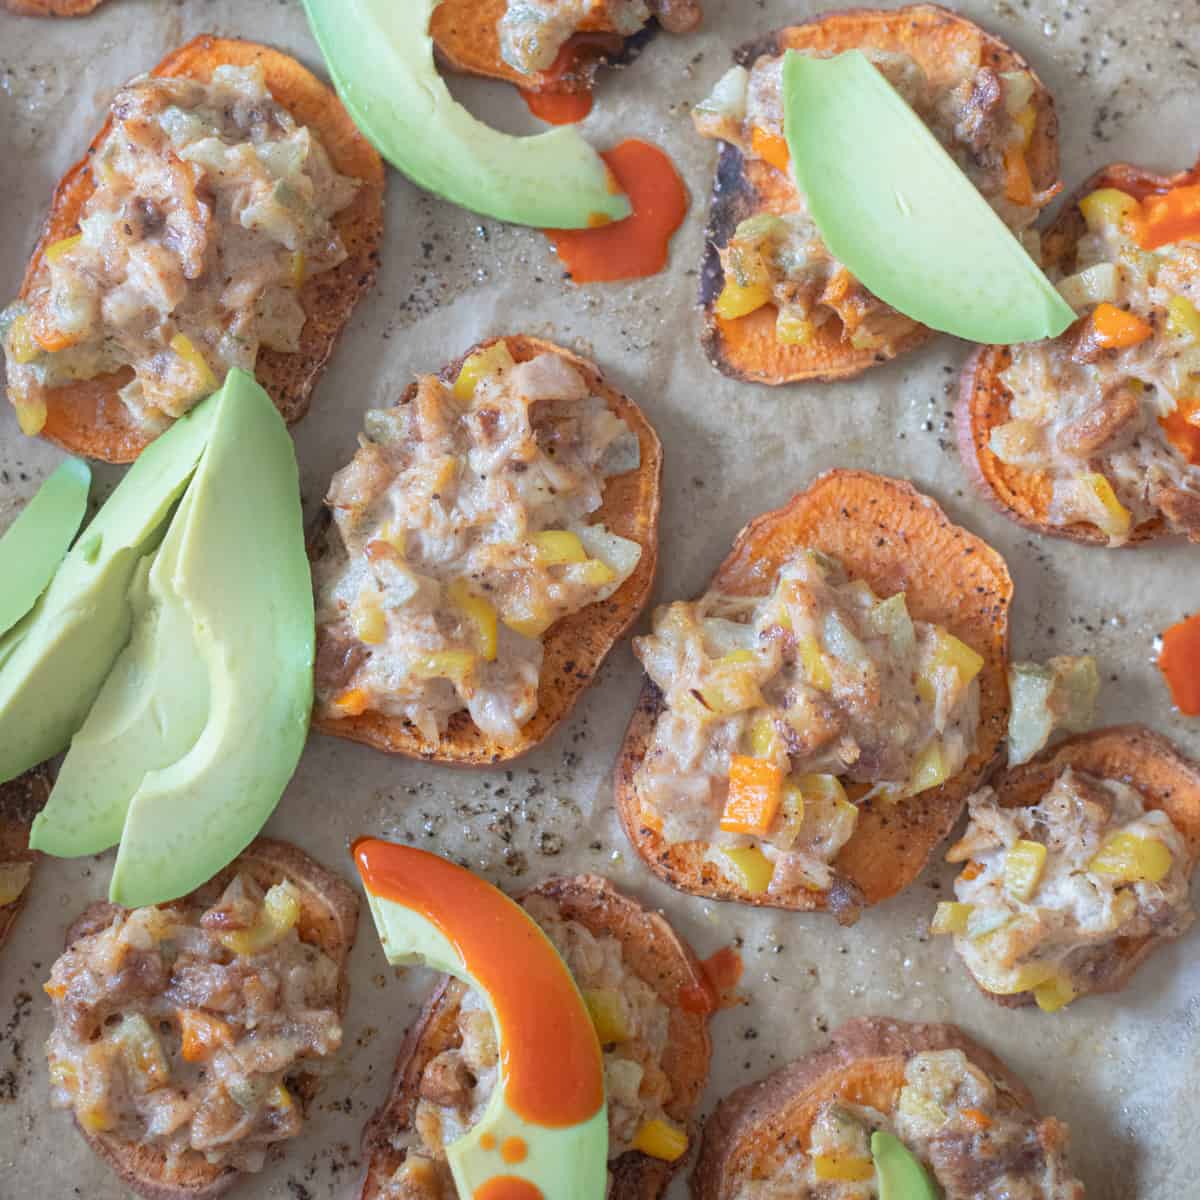 Sweet potato slices topped with a baked tuna mixture, avocado, and hot sauce. 